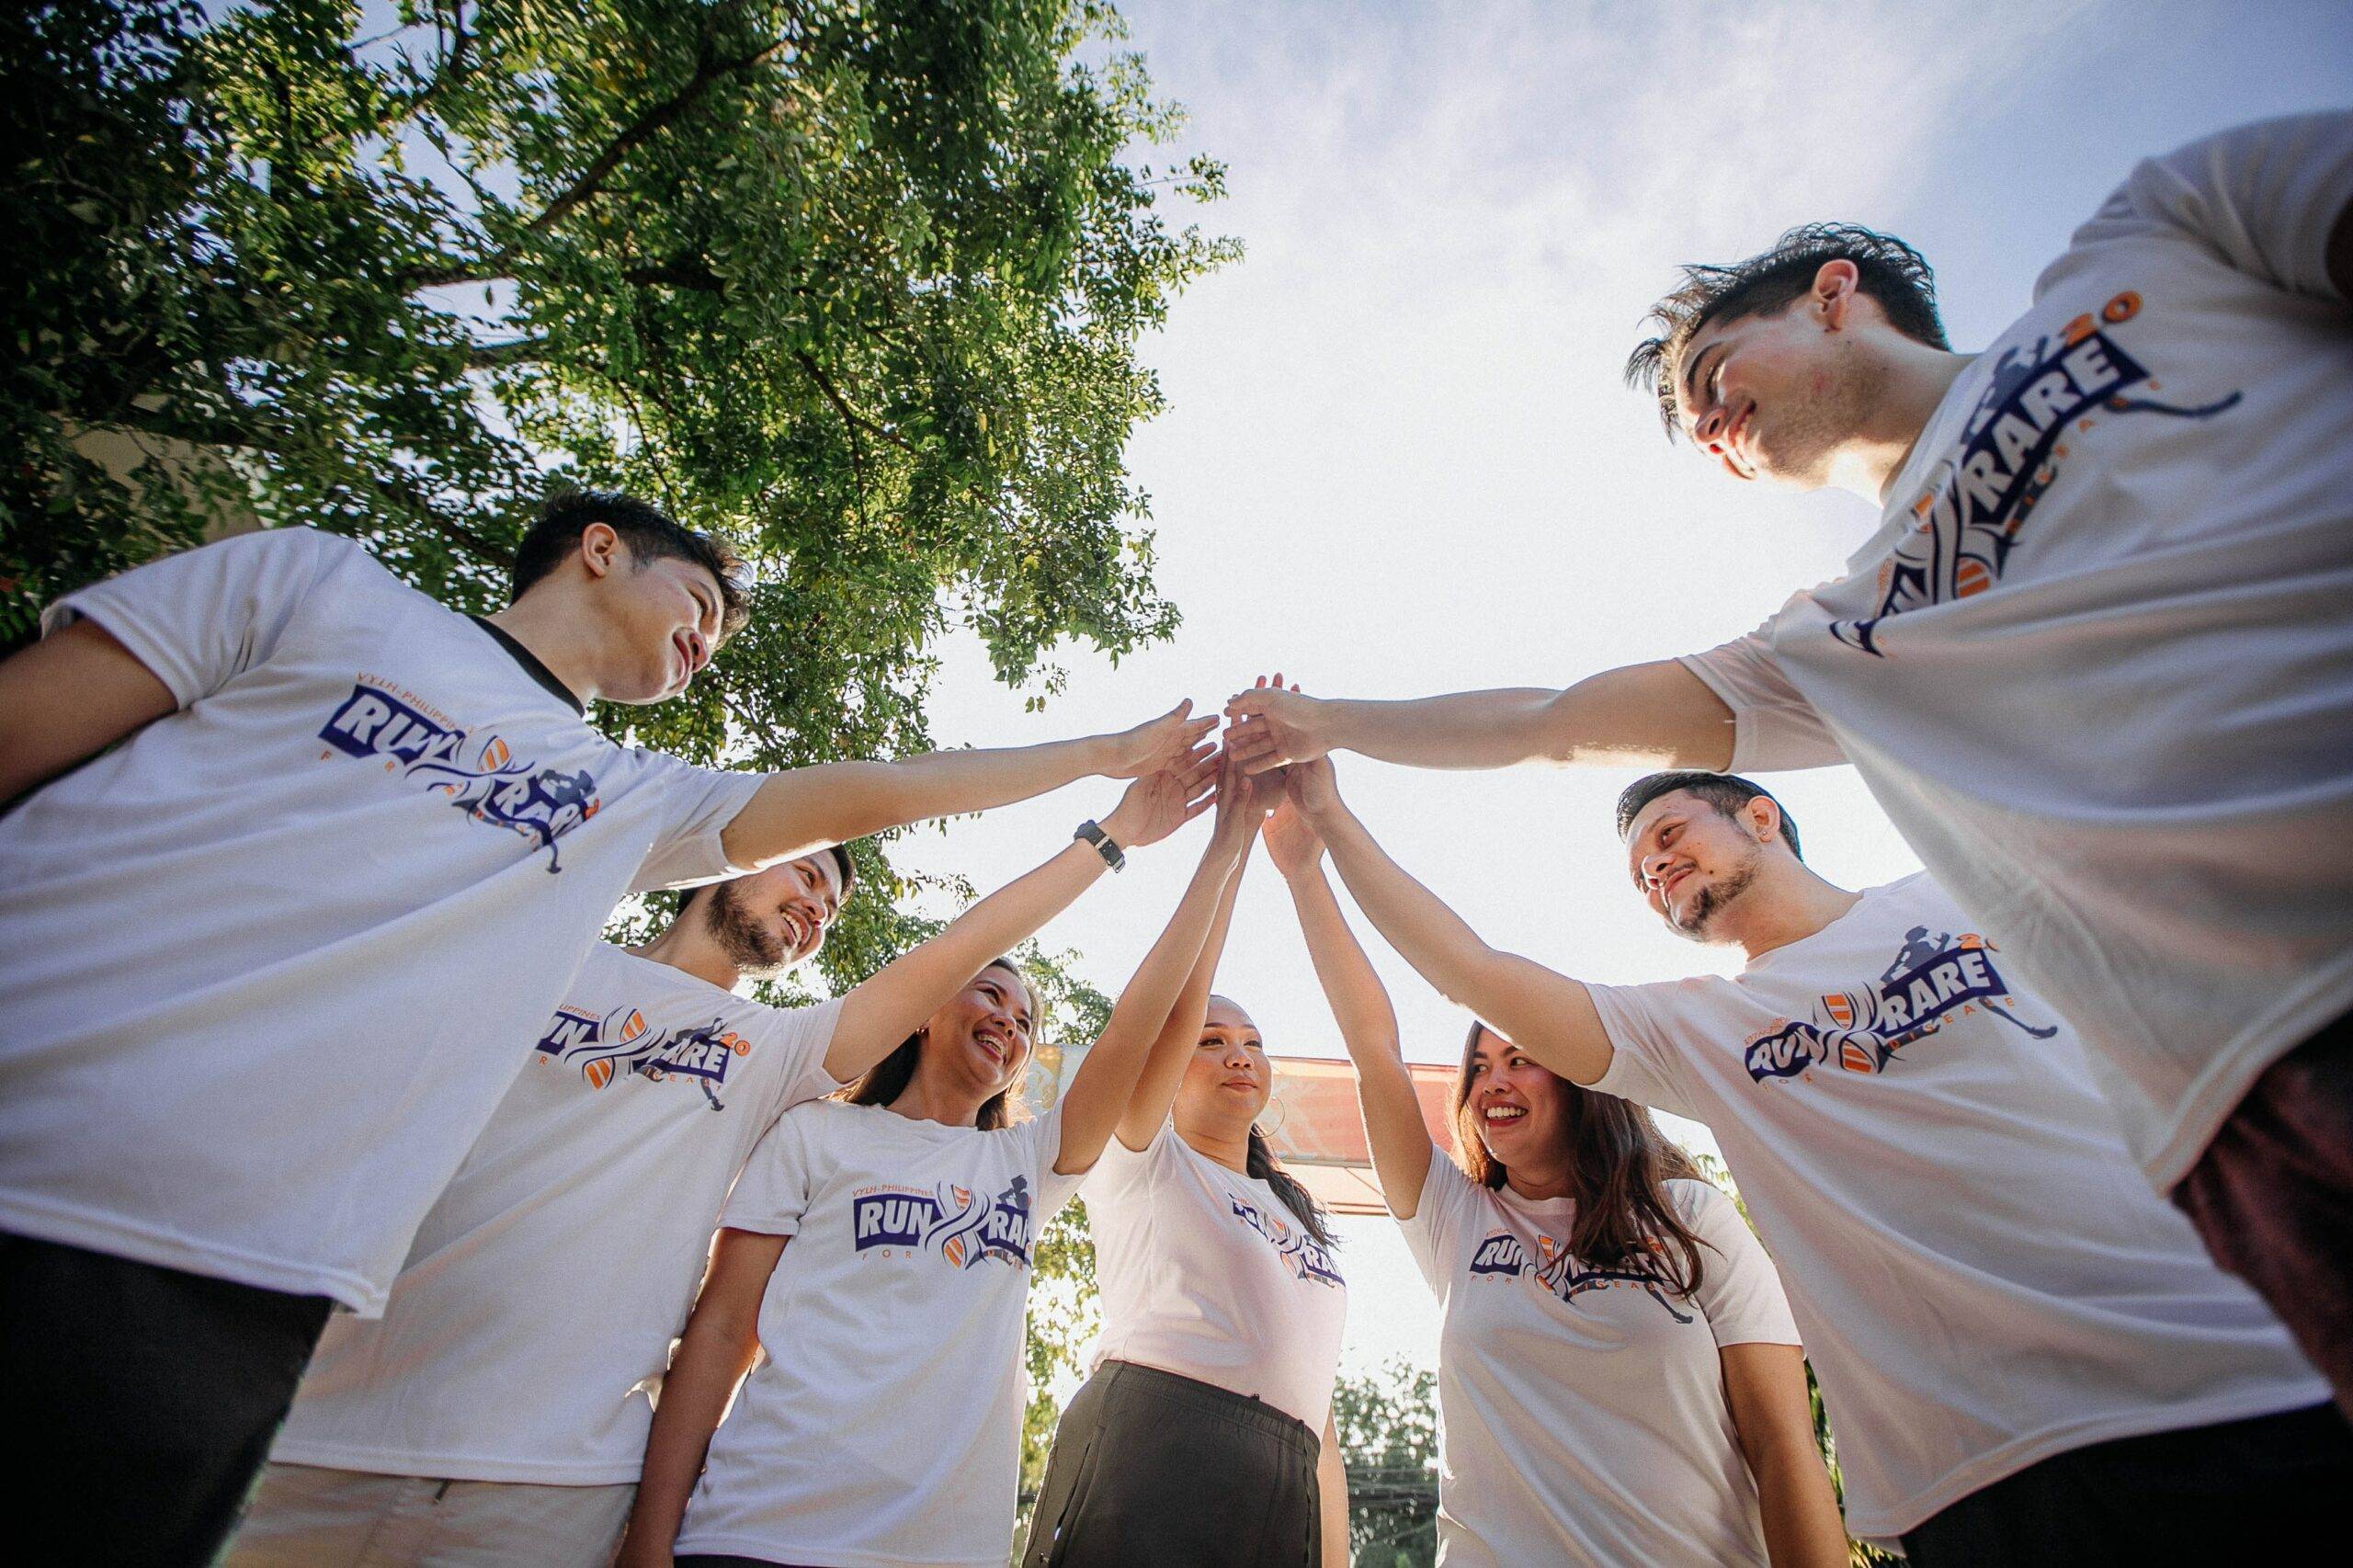 20 team building activities to boost workplace togetherness and improve business results